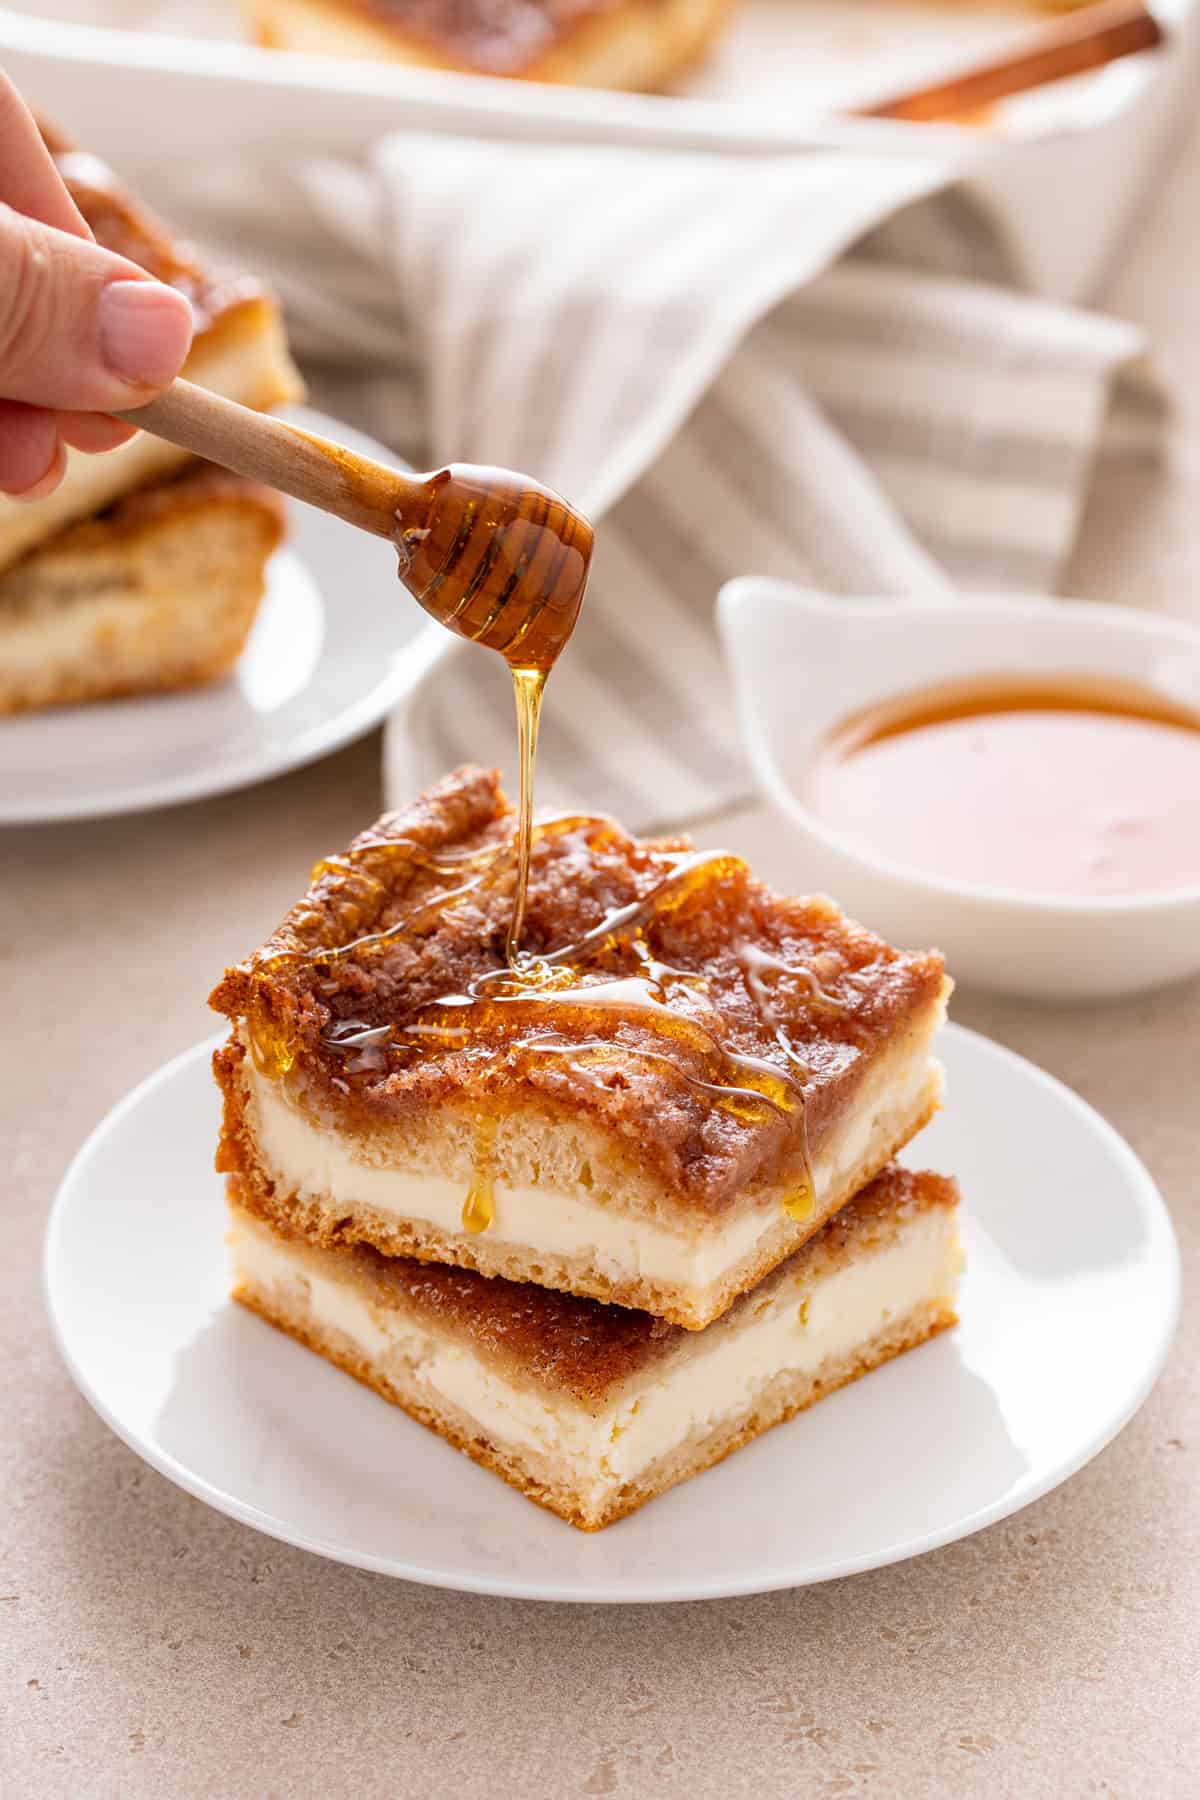 Honey being drizzled over the top of two stacked slices of sopapilla cheesecake on a white plate.